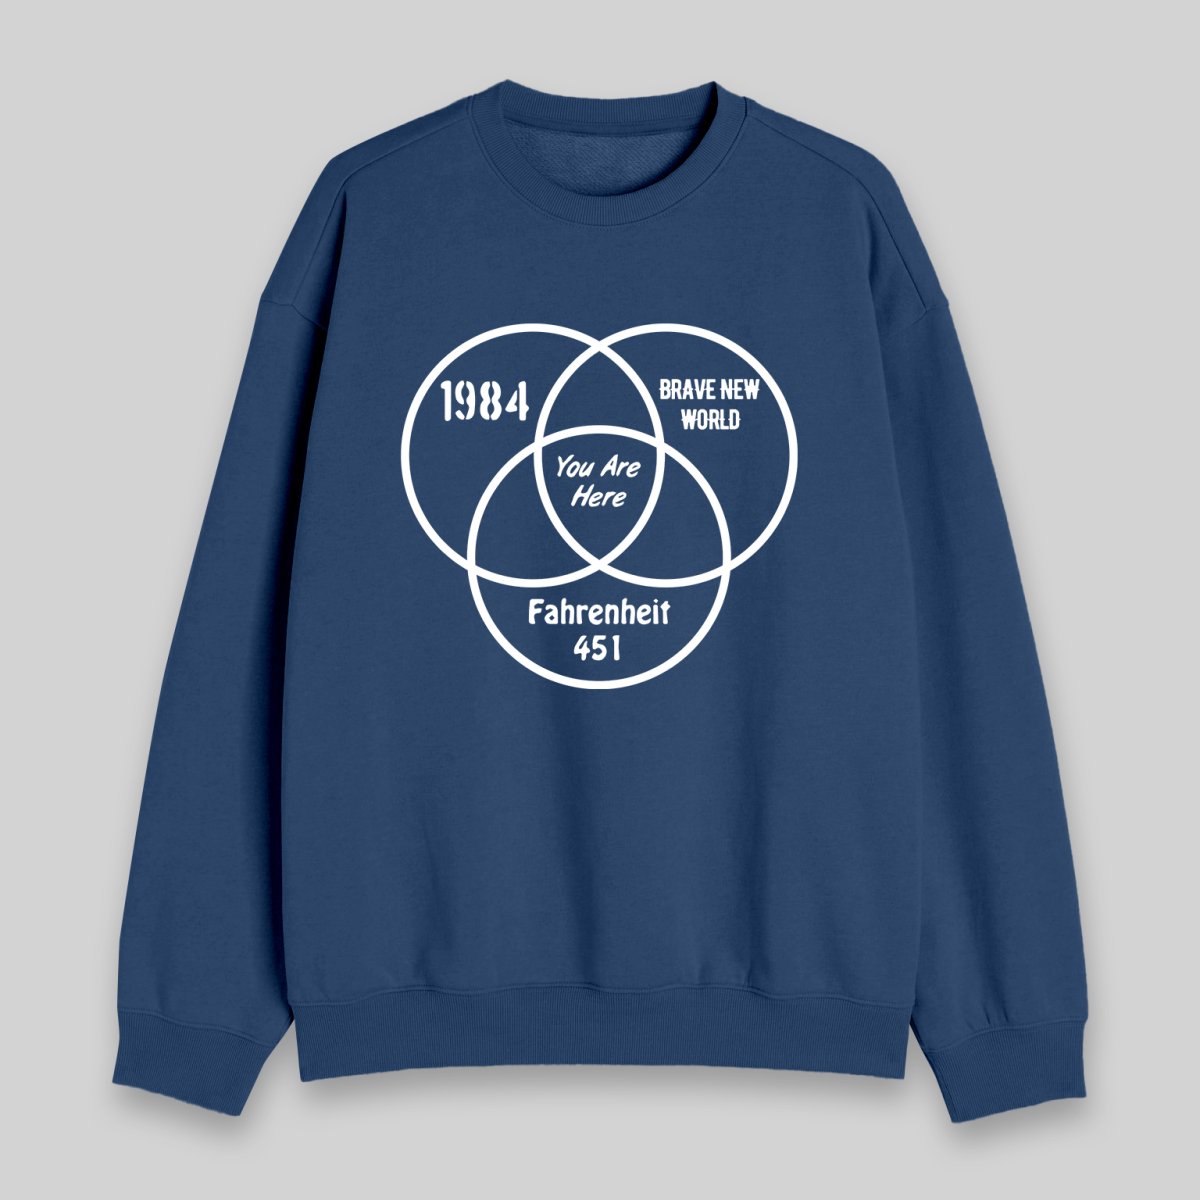 You Are Here Sweatshirt - Geeksoutfit